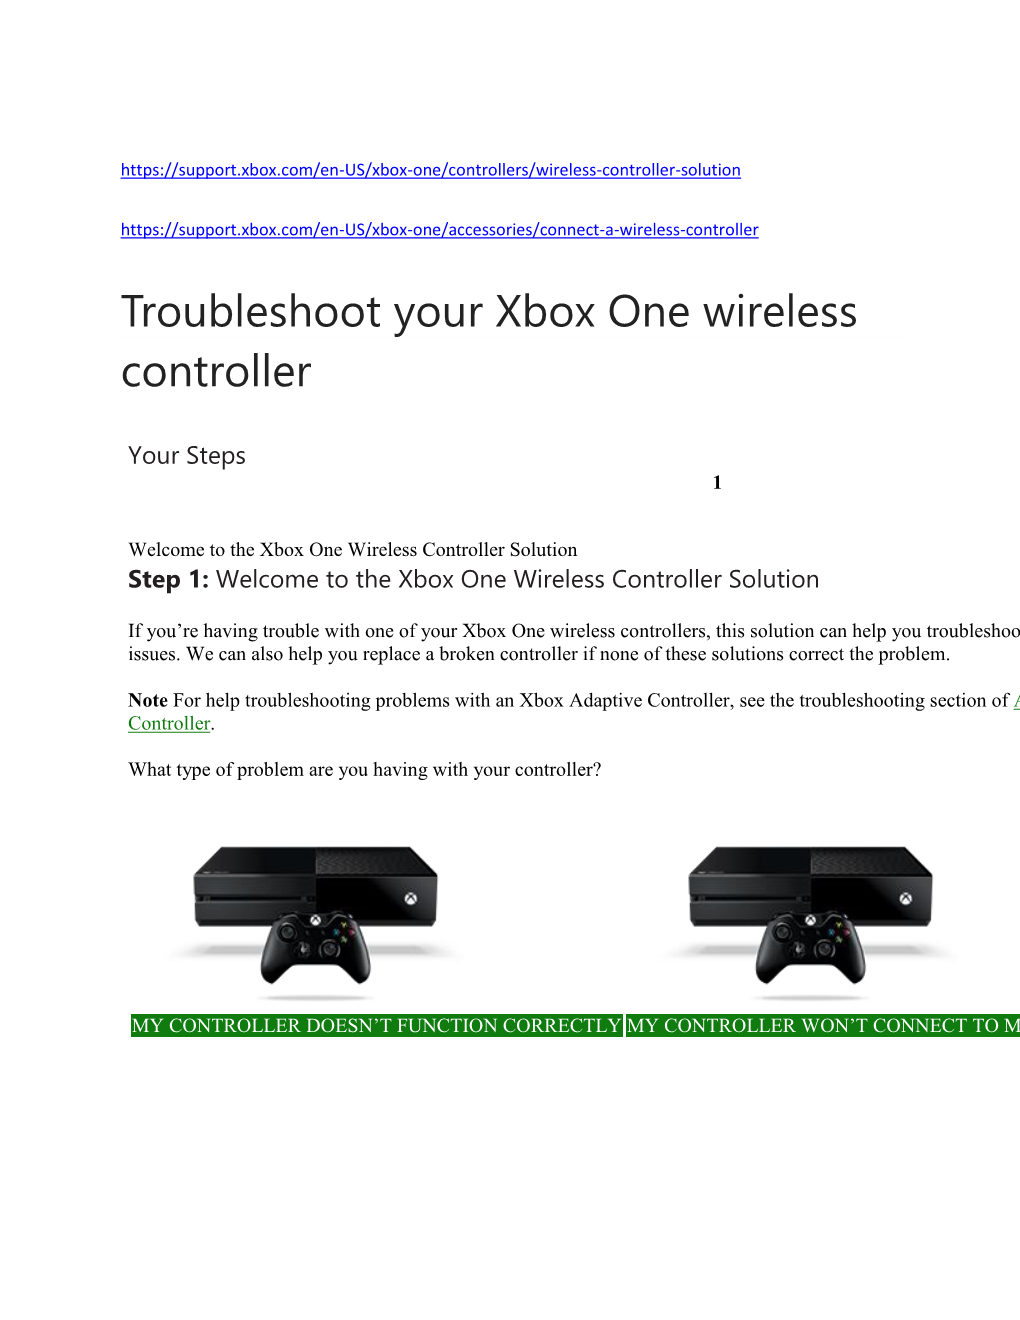 Troubleshoot Your Xbox One Wireless Controller